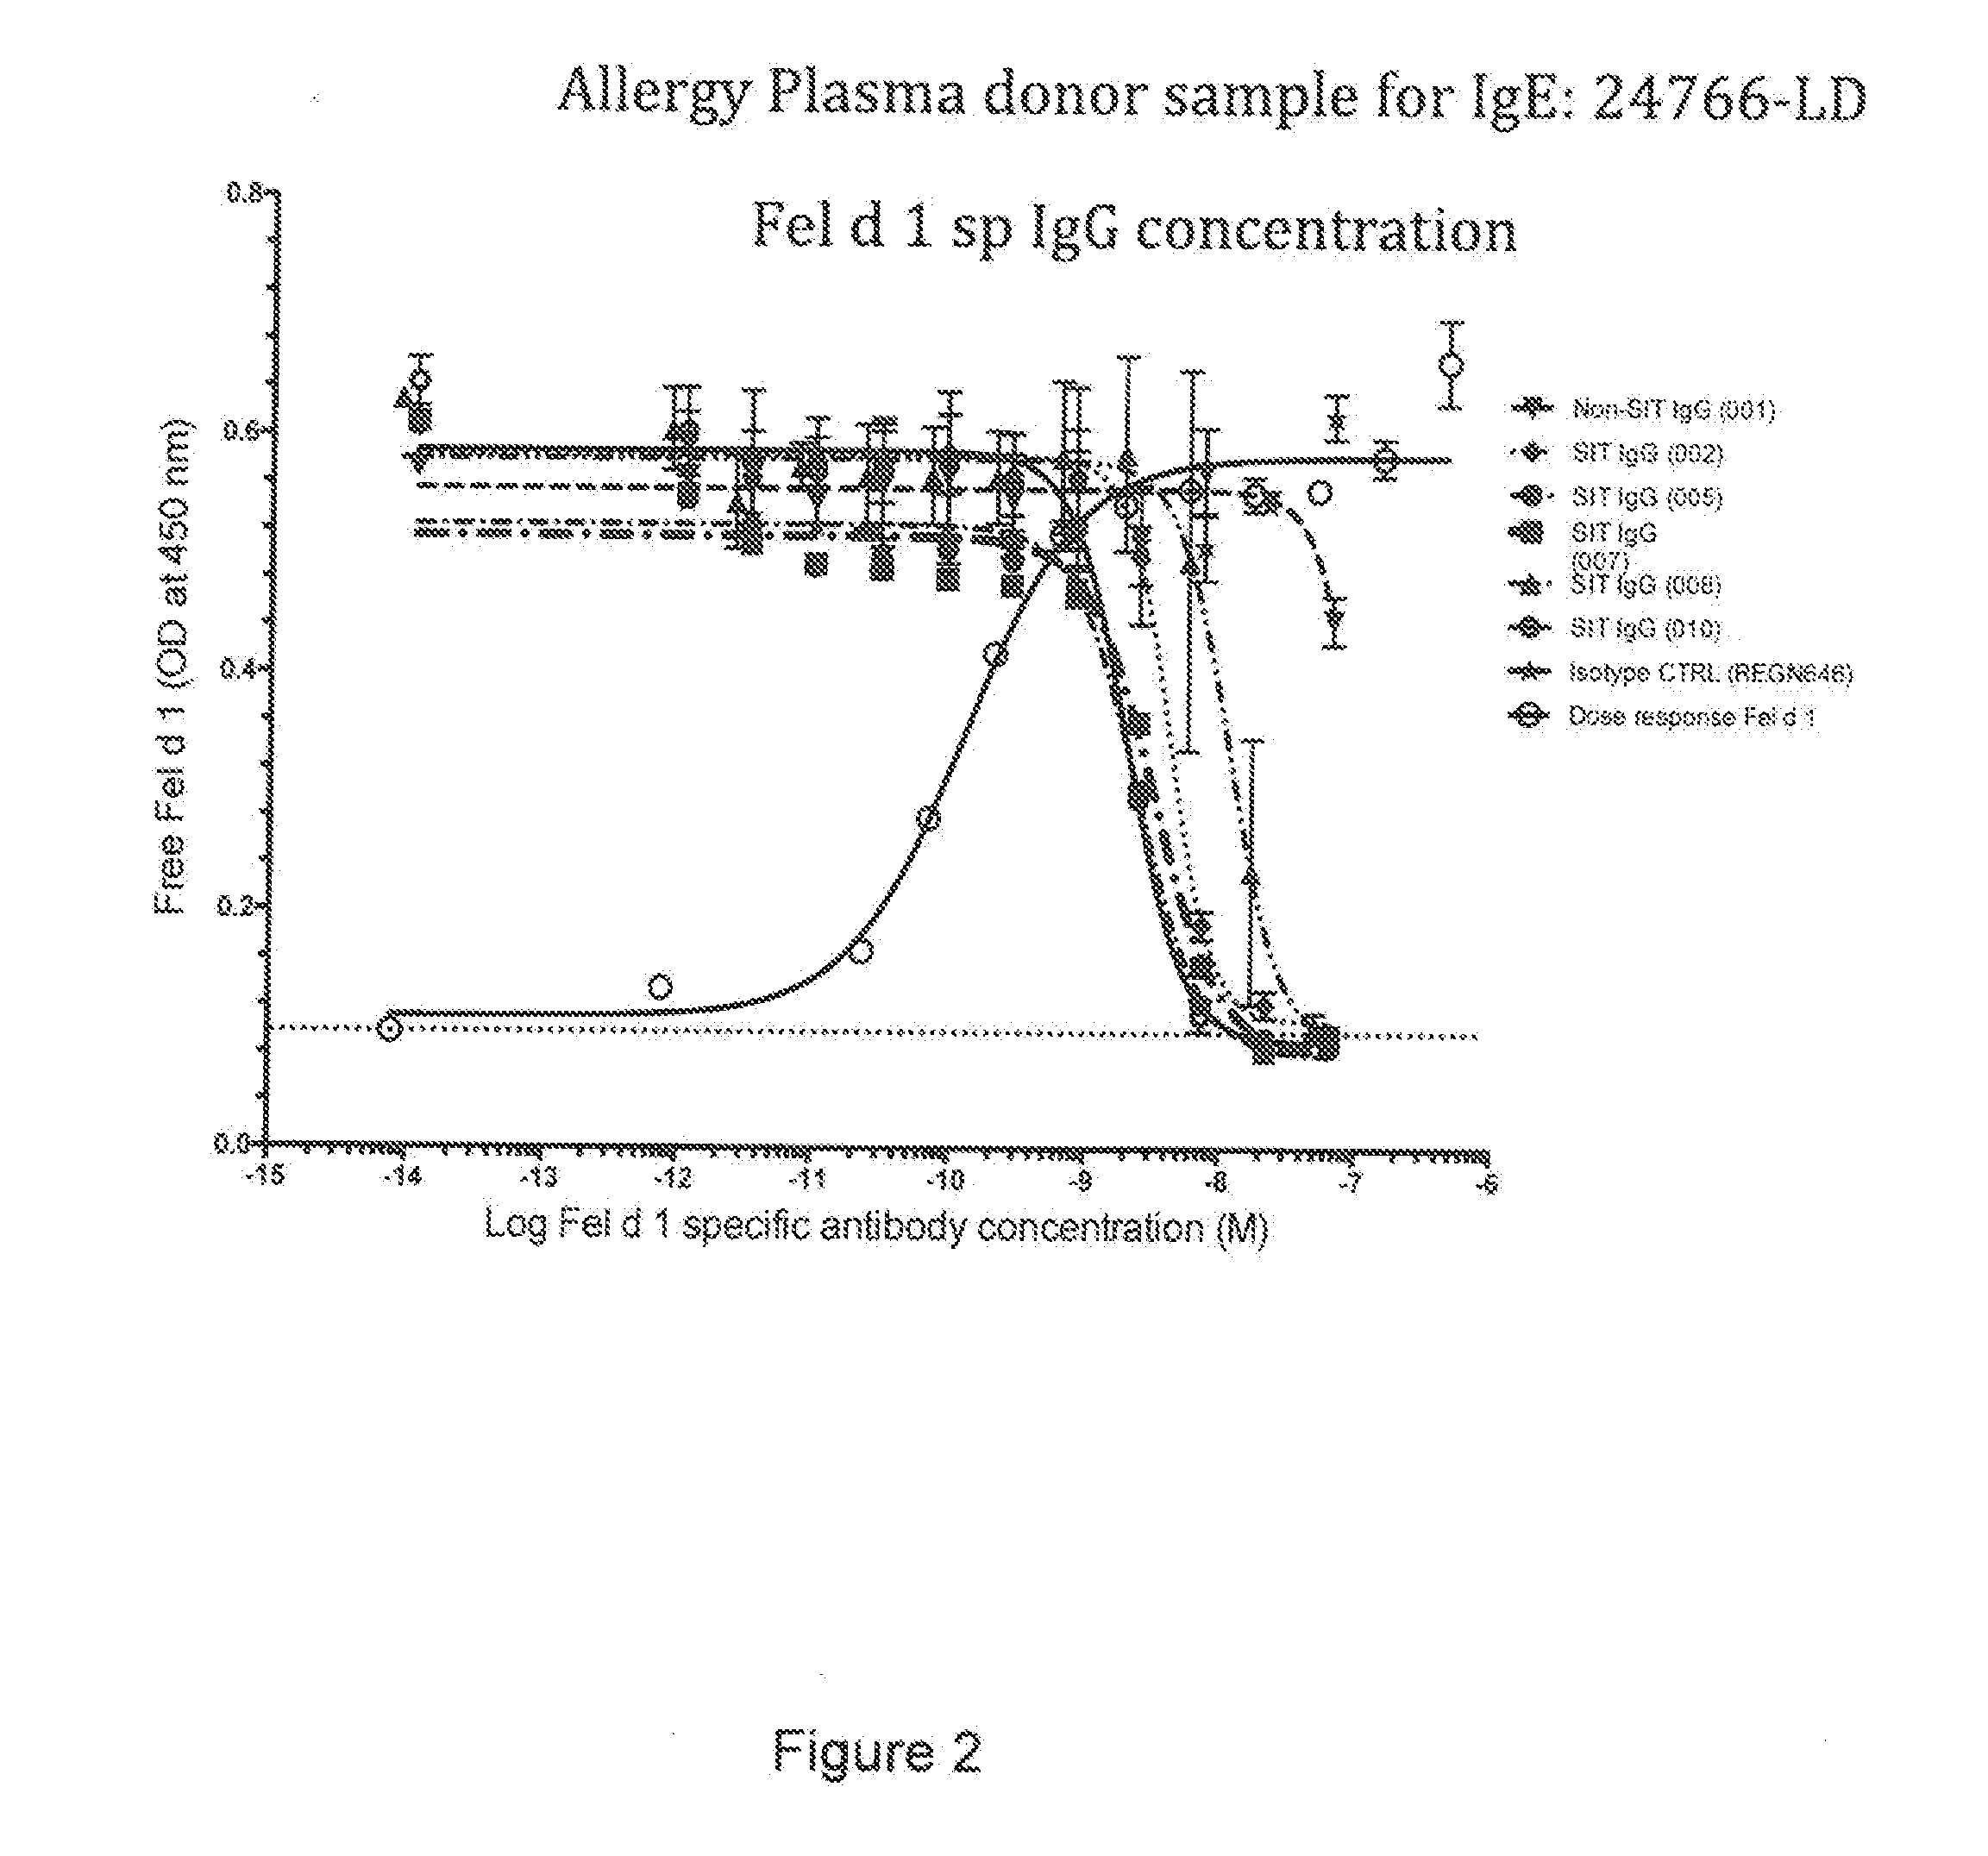 Diagnostic tests and methods for assessing safety, efficacy or outcome of allergen-specific immunotherapy (SIT)